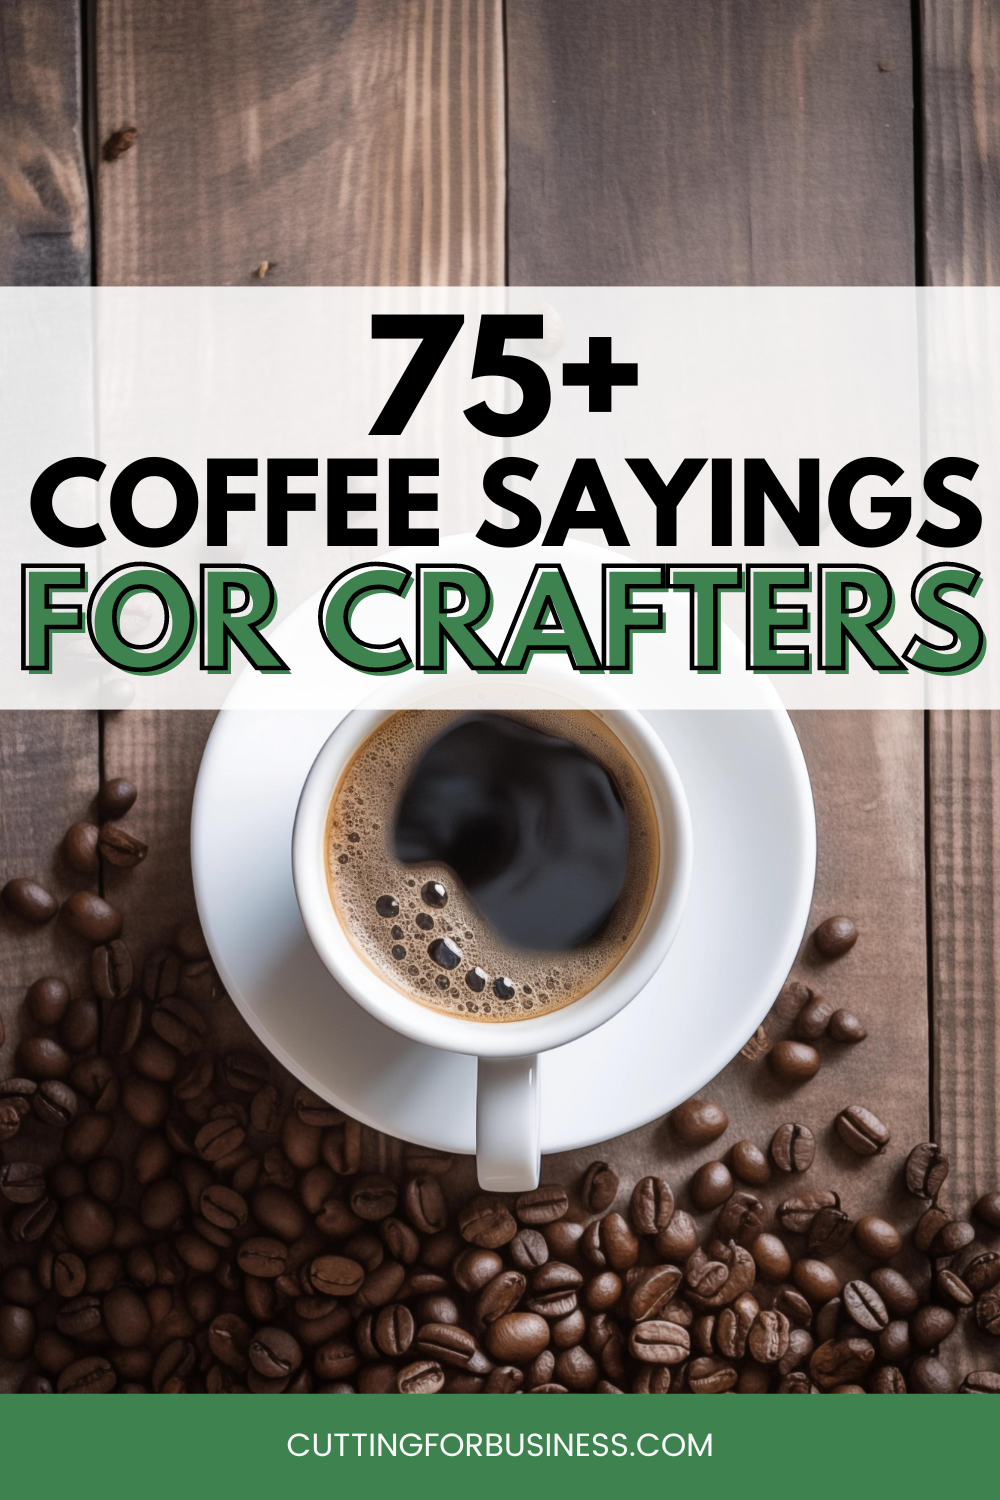 75+ Coffee Sayings for Crafters - cuttingforbusiness.com